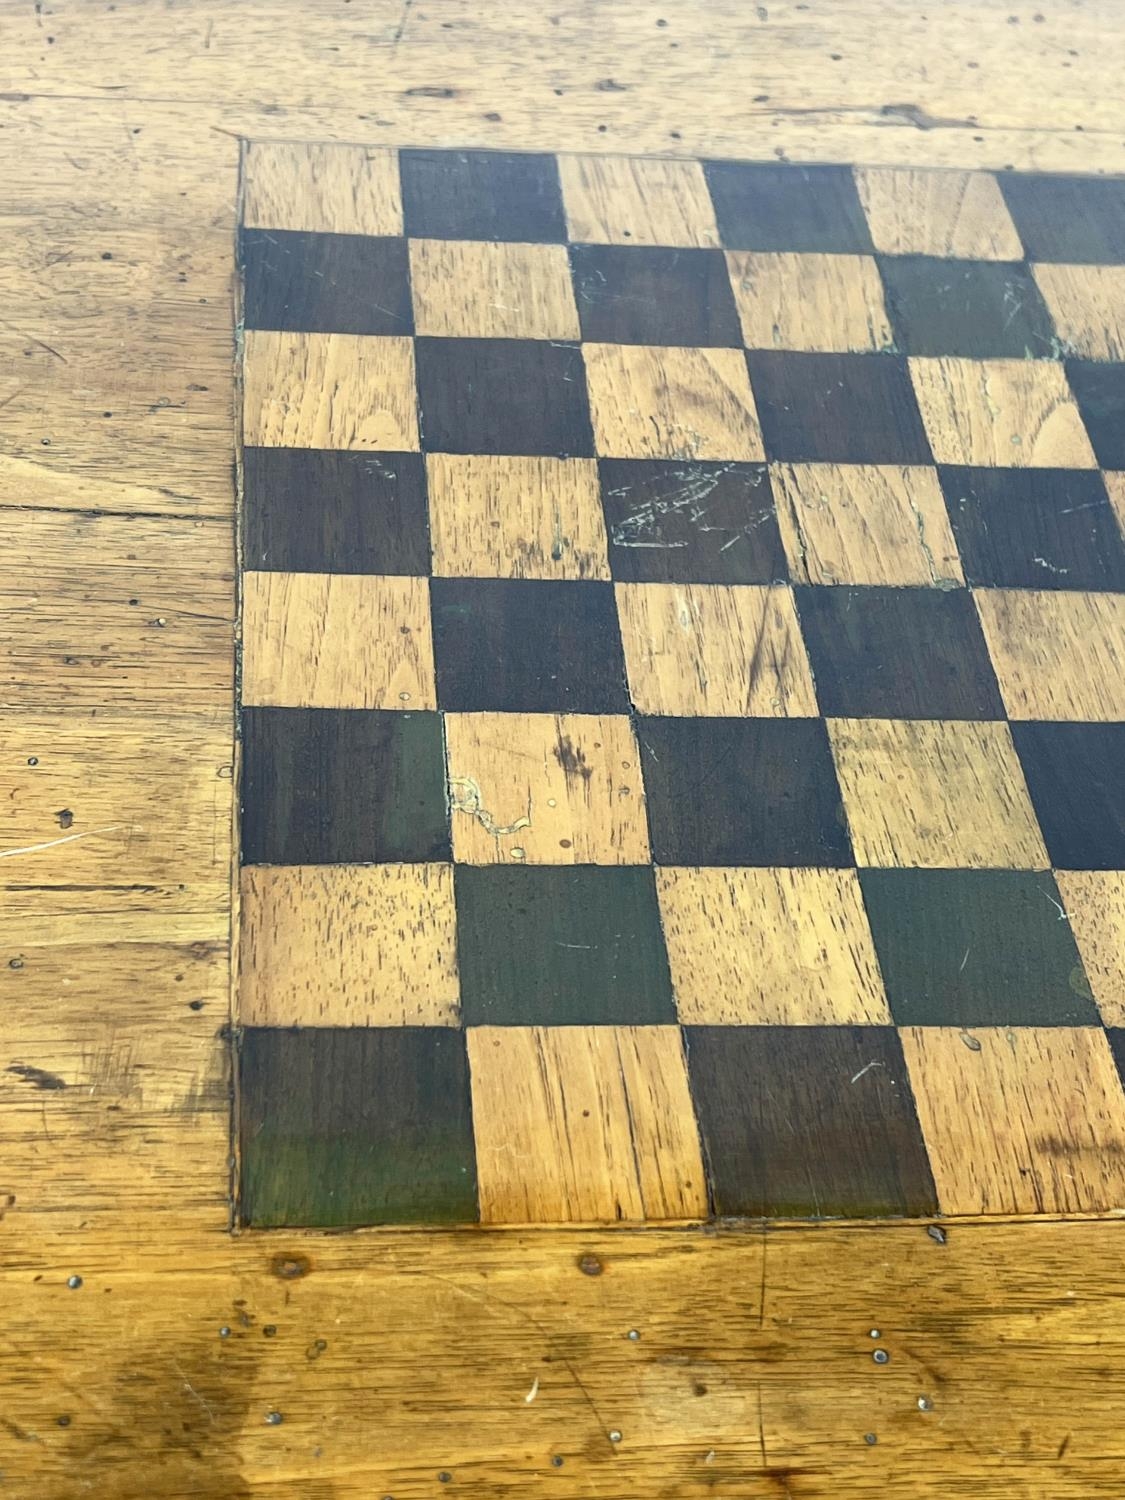 GAMES TABLE, 73cm H x 84cm W x 82cm D 18th century Italian walnut with chessboard inlaid top and - Image 5 of 7